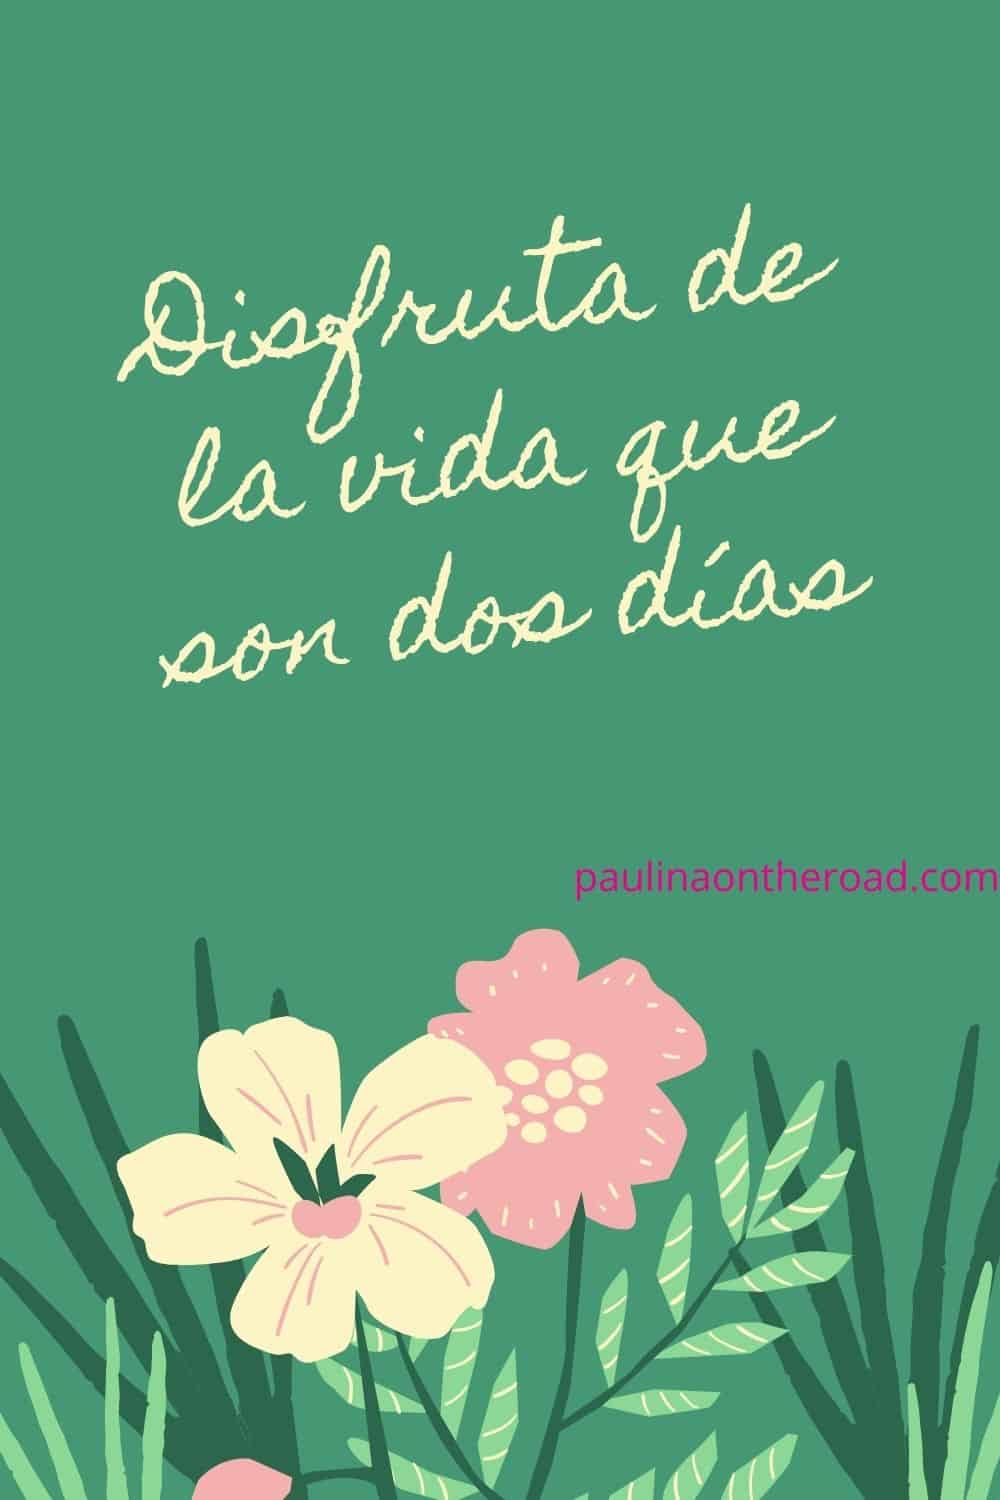 25 Positive Quotes in Spanish That Will Make Your Day! - Paulina on the